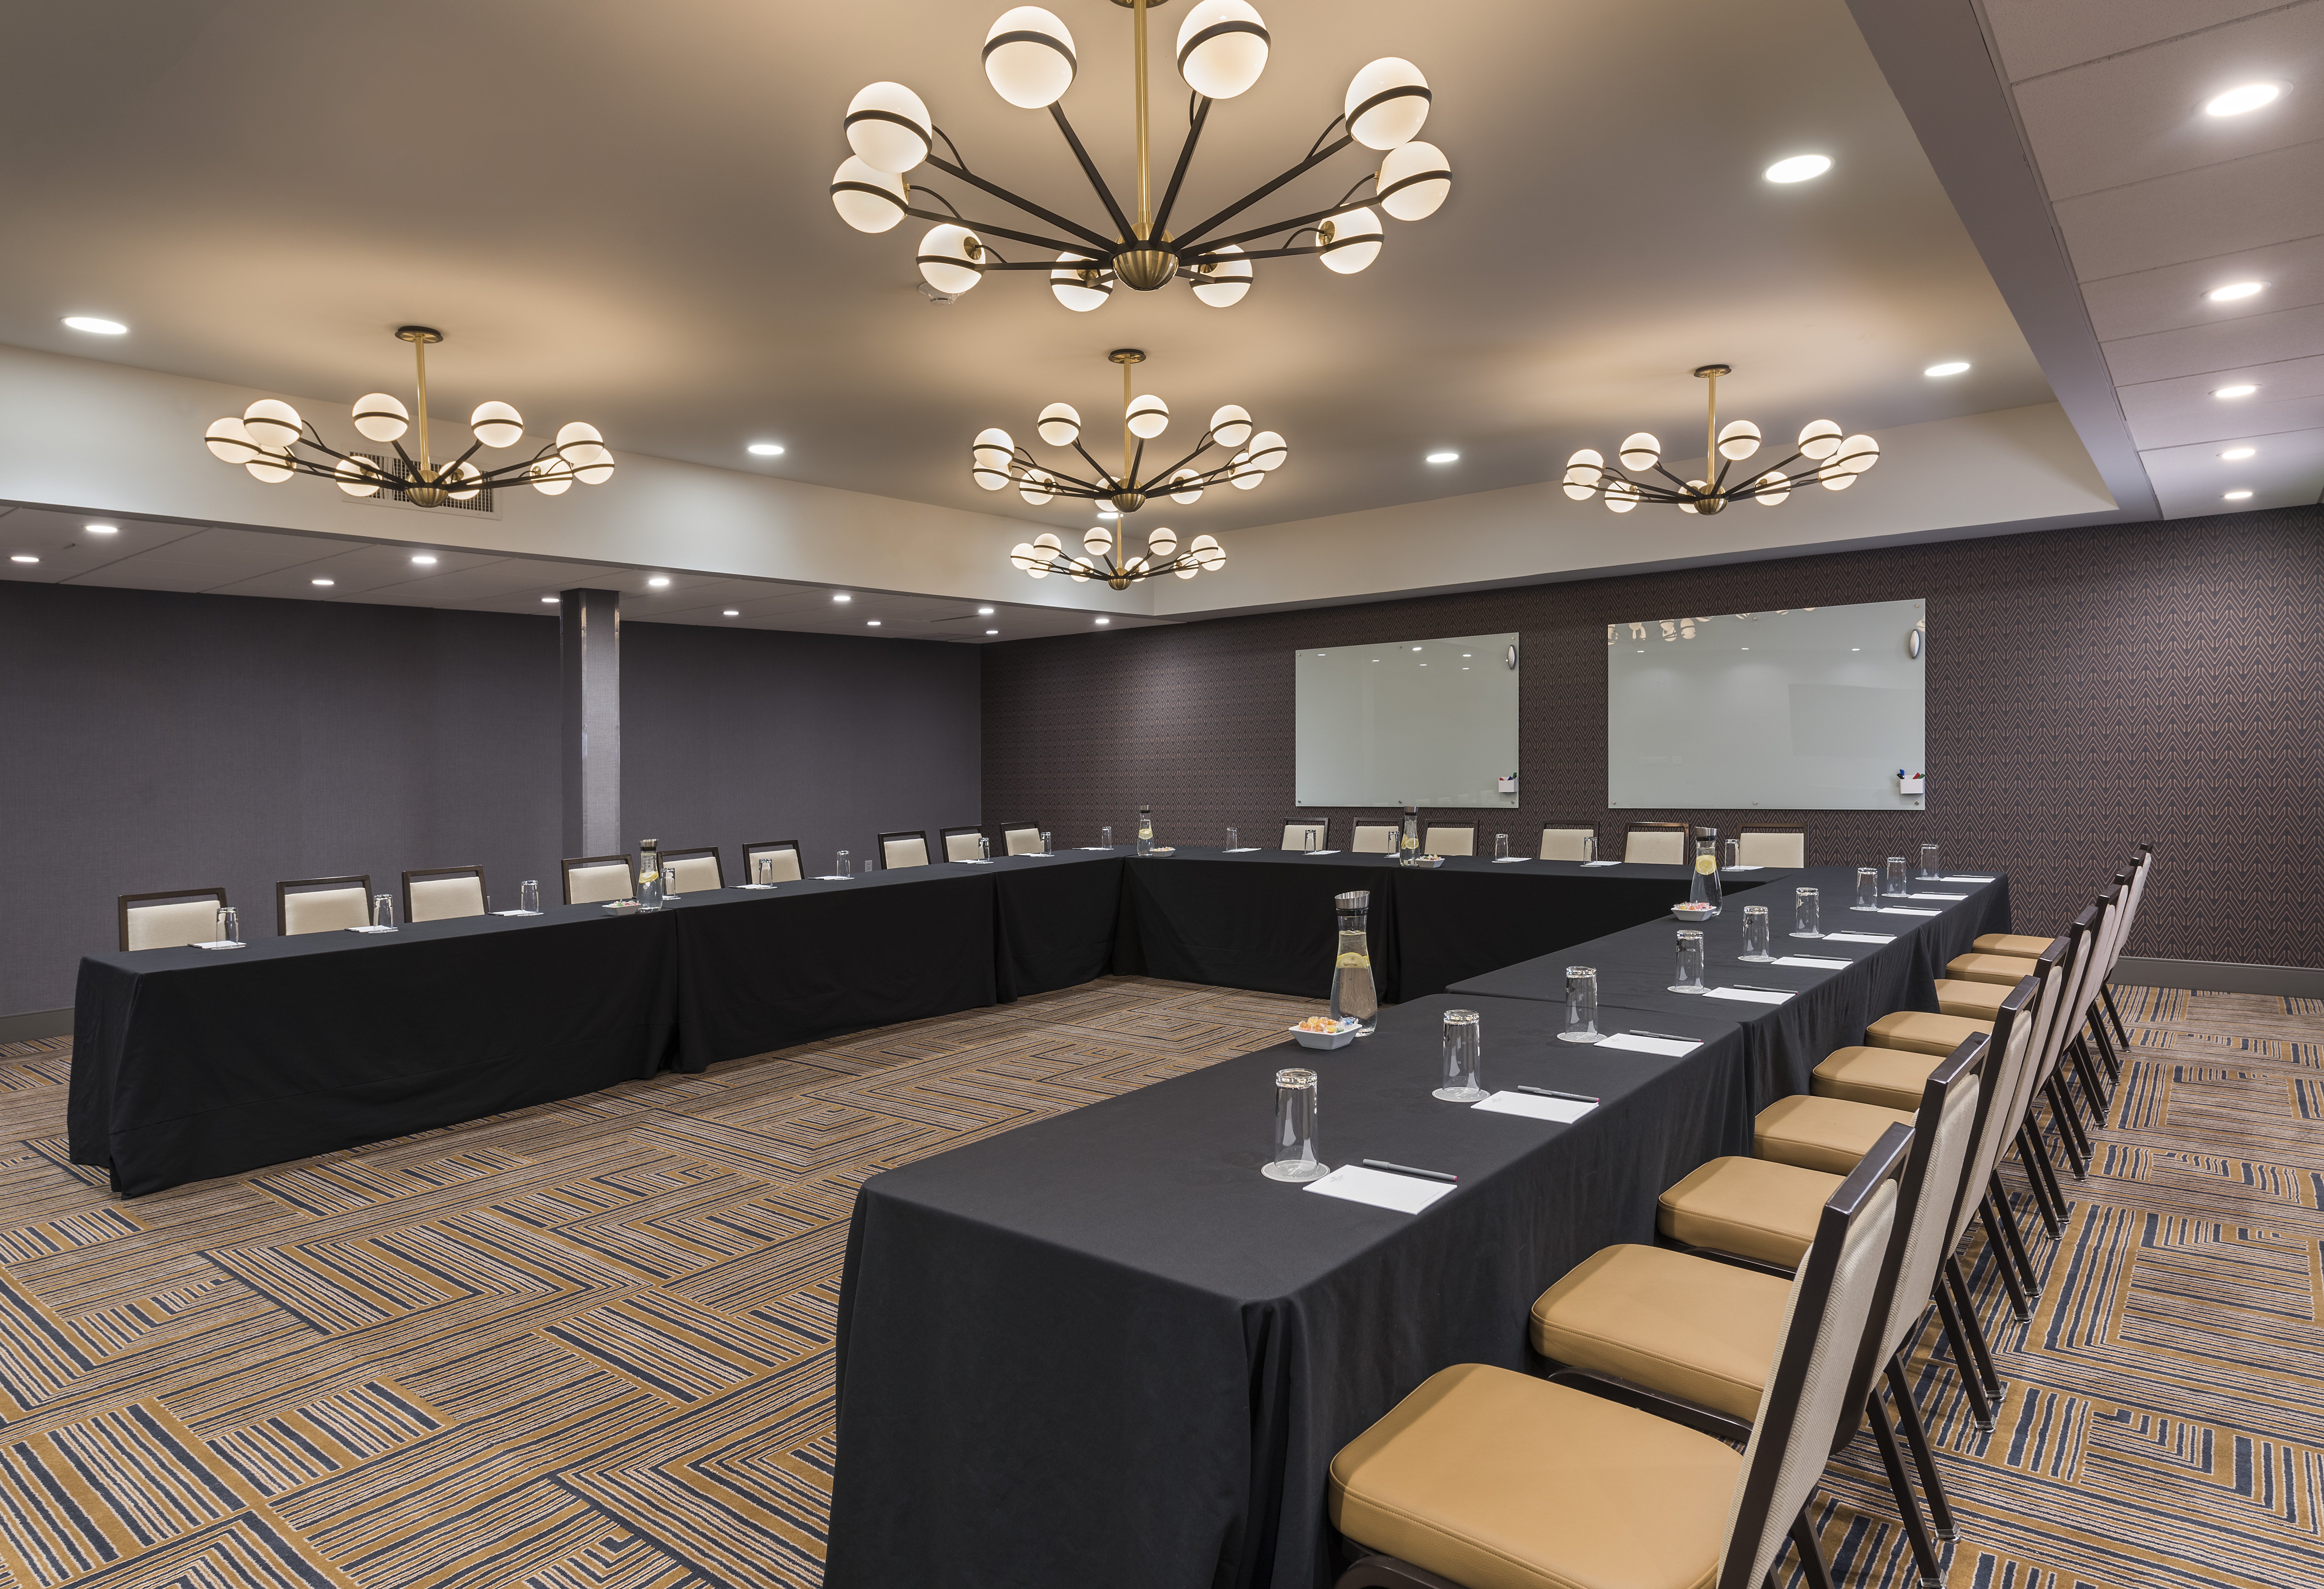 Find the right set-up for your conference.